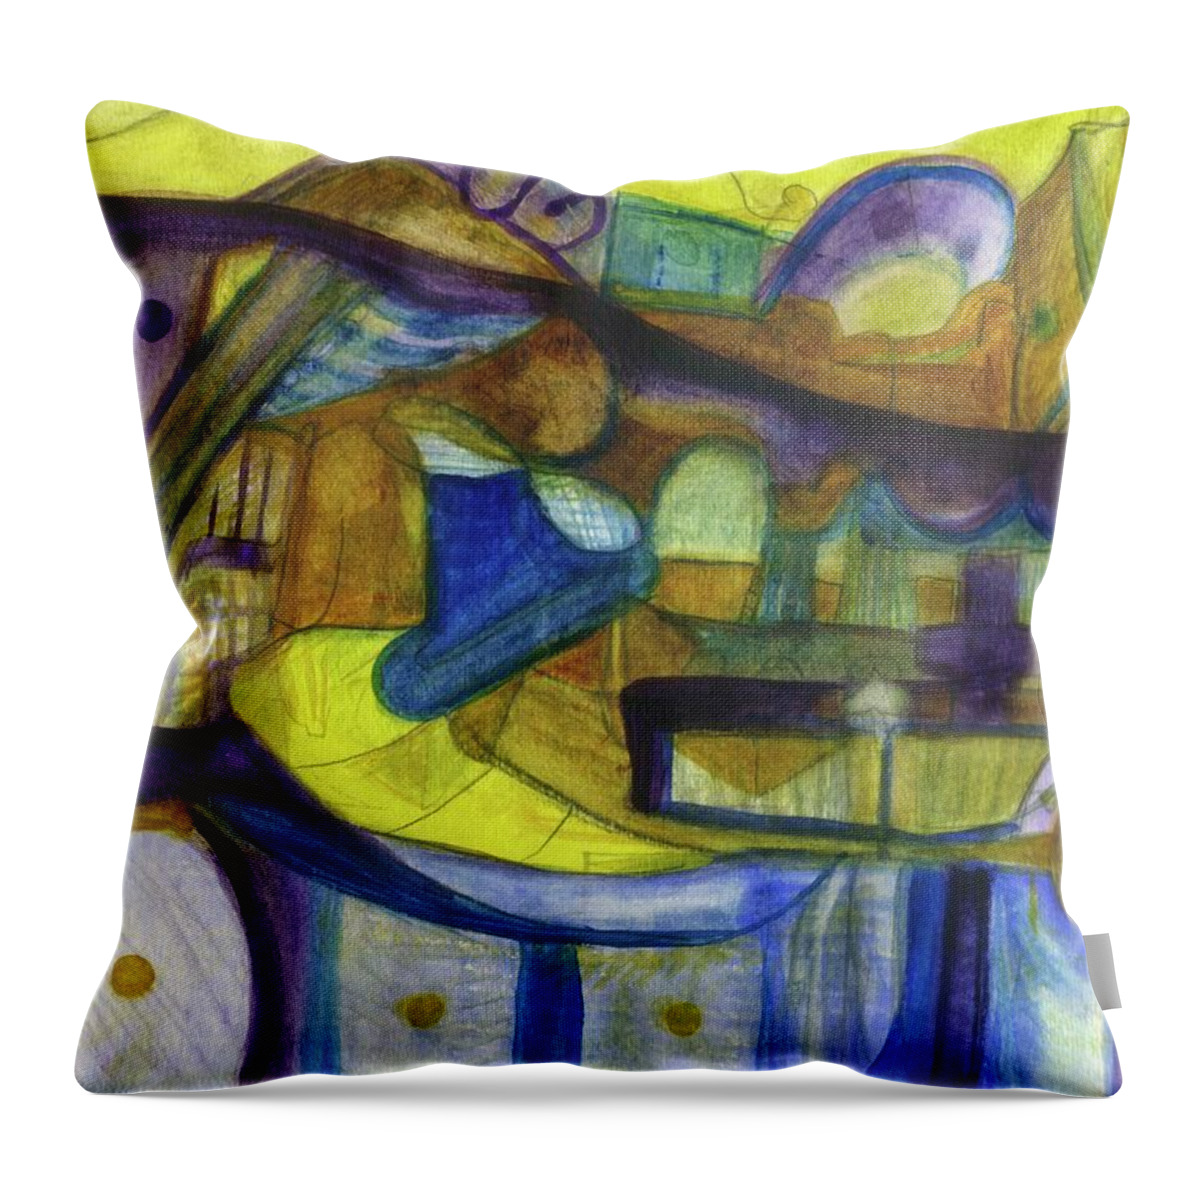 Angels We Have Heard On High Throw Pillow featuring the painting When Angels Sing by Stephen Lucas